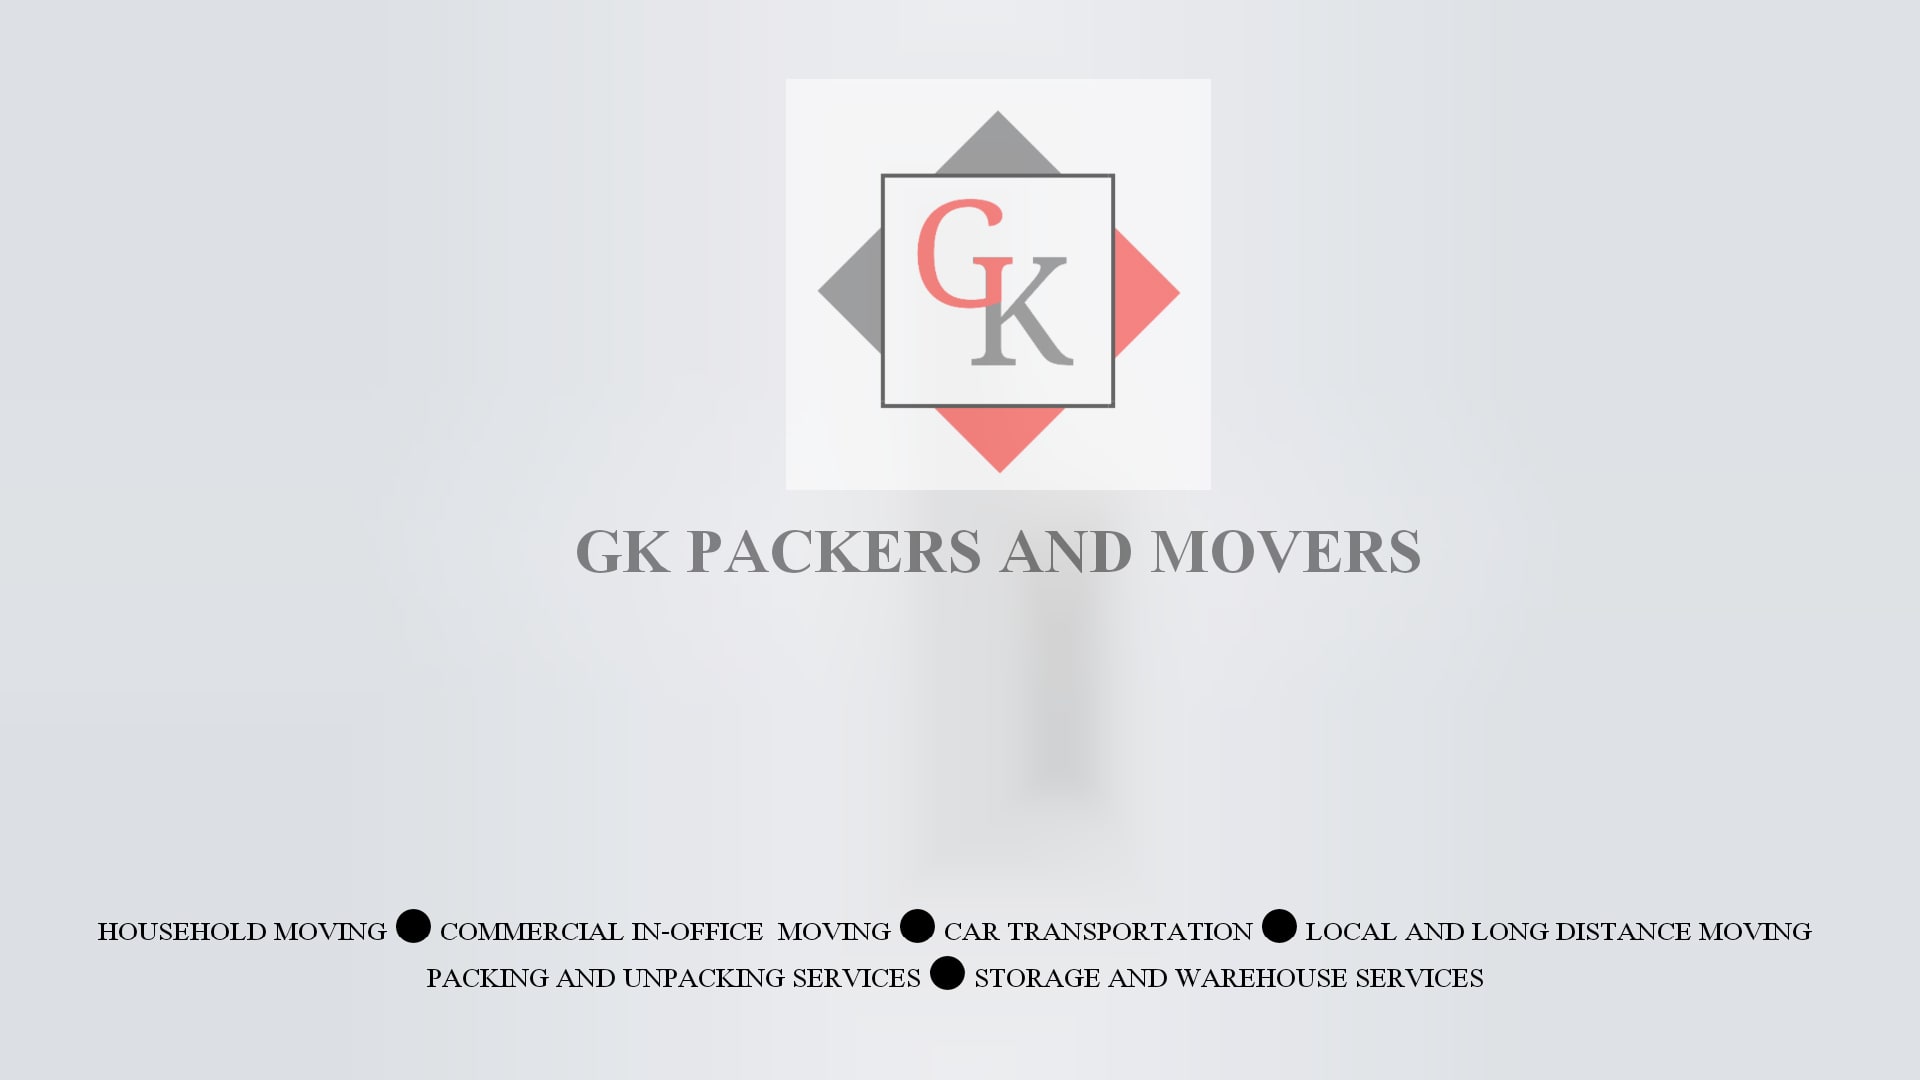 Gk Packers and Movers